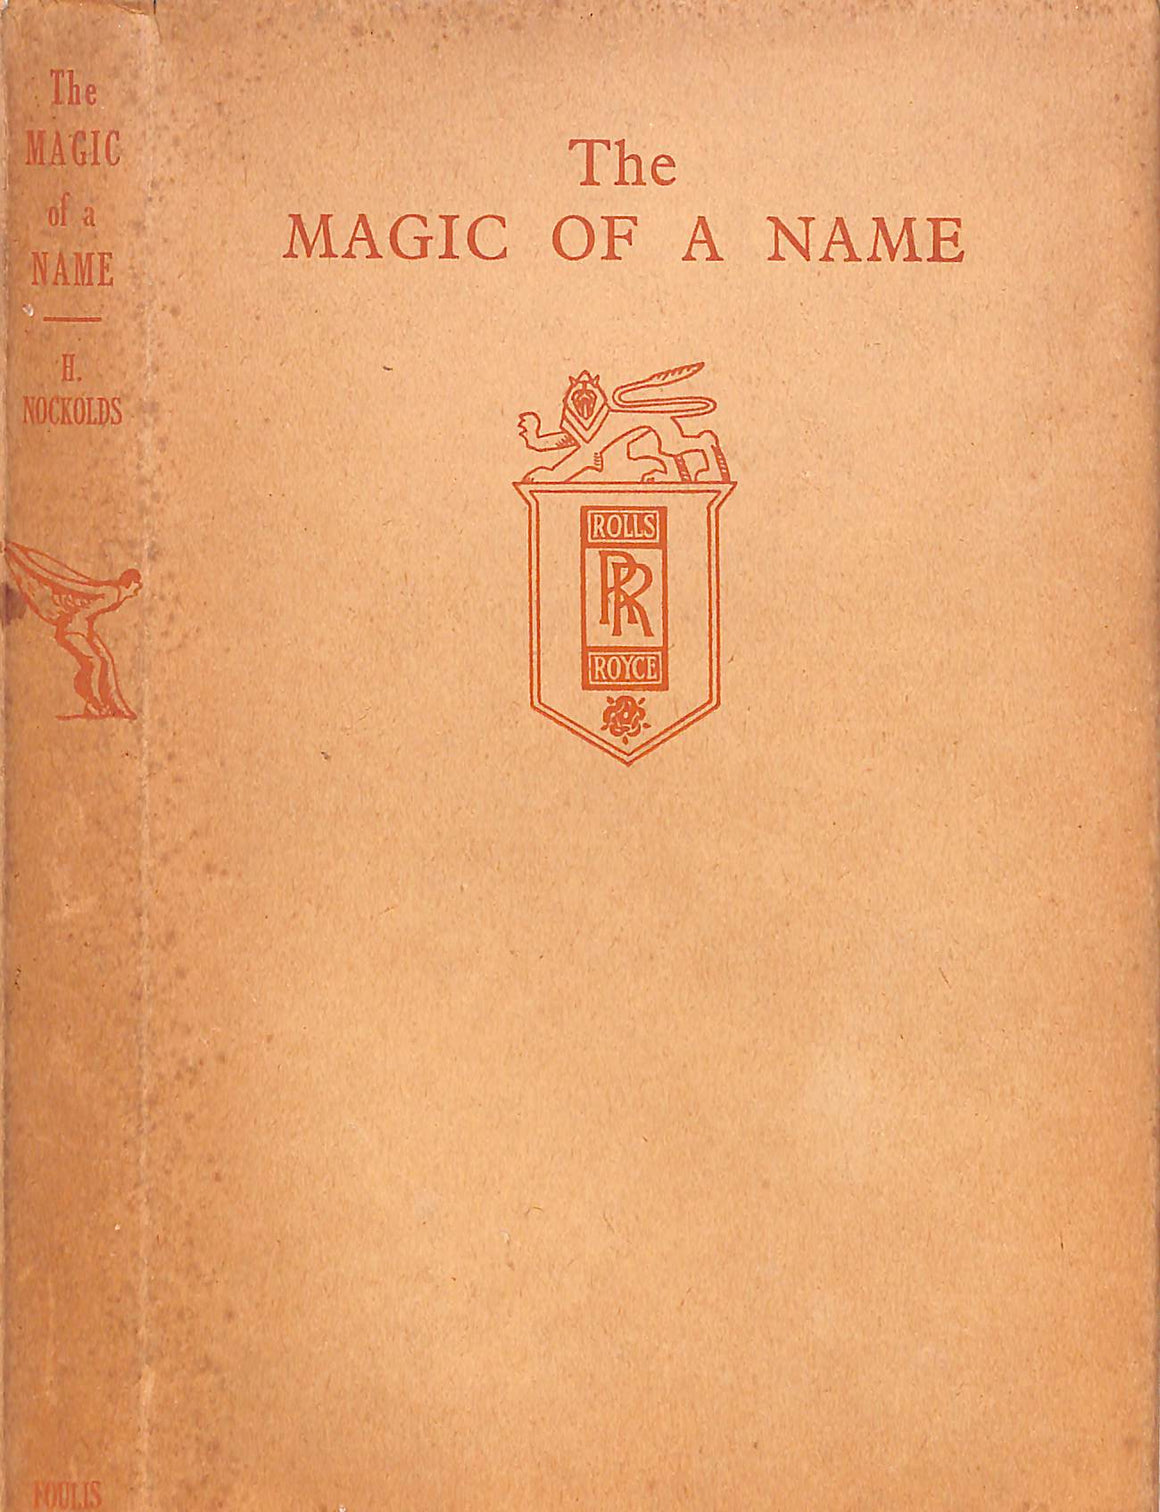 "The Magic Of A Name: Rolls Royce" 1945 NOCKOLDS, H.